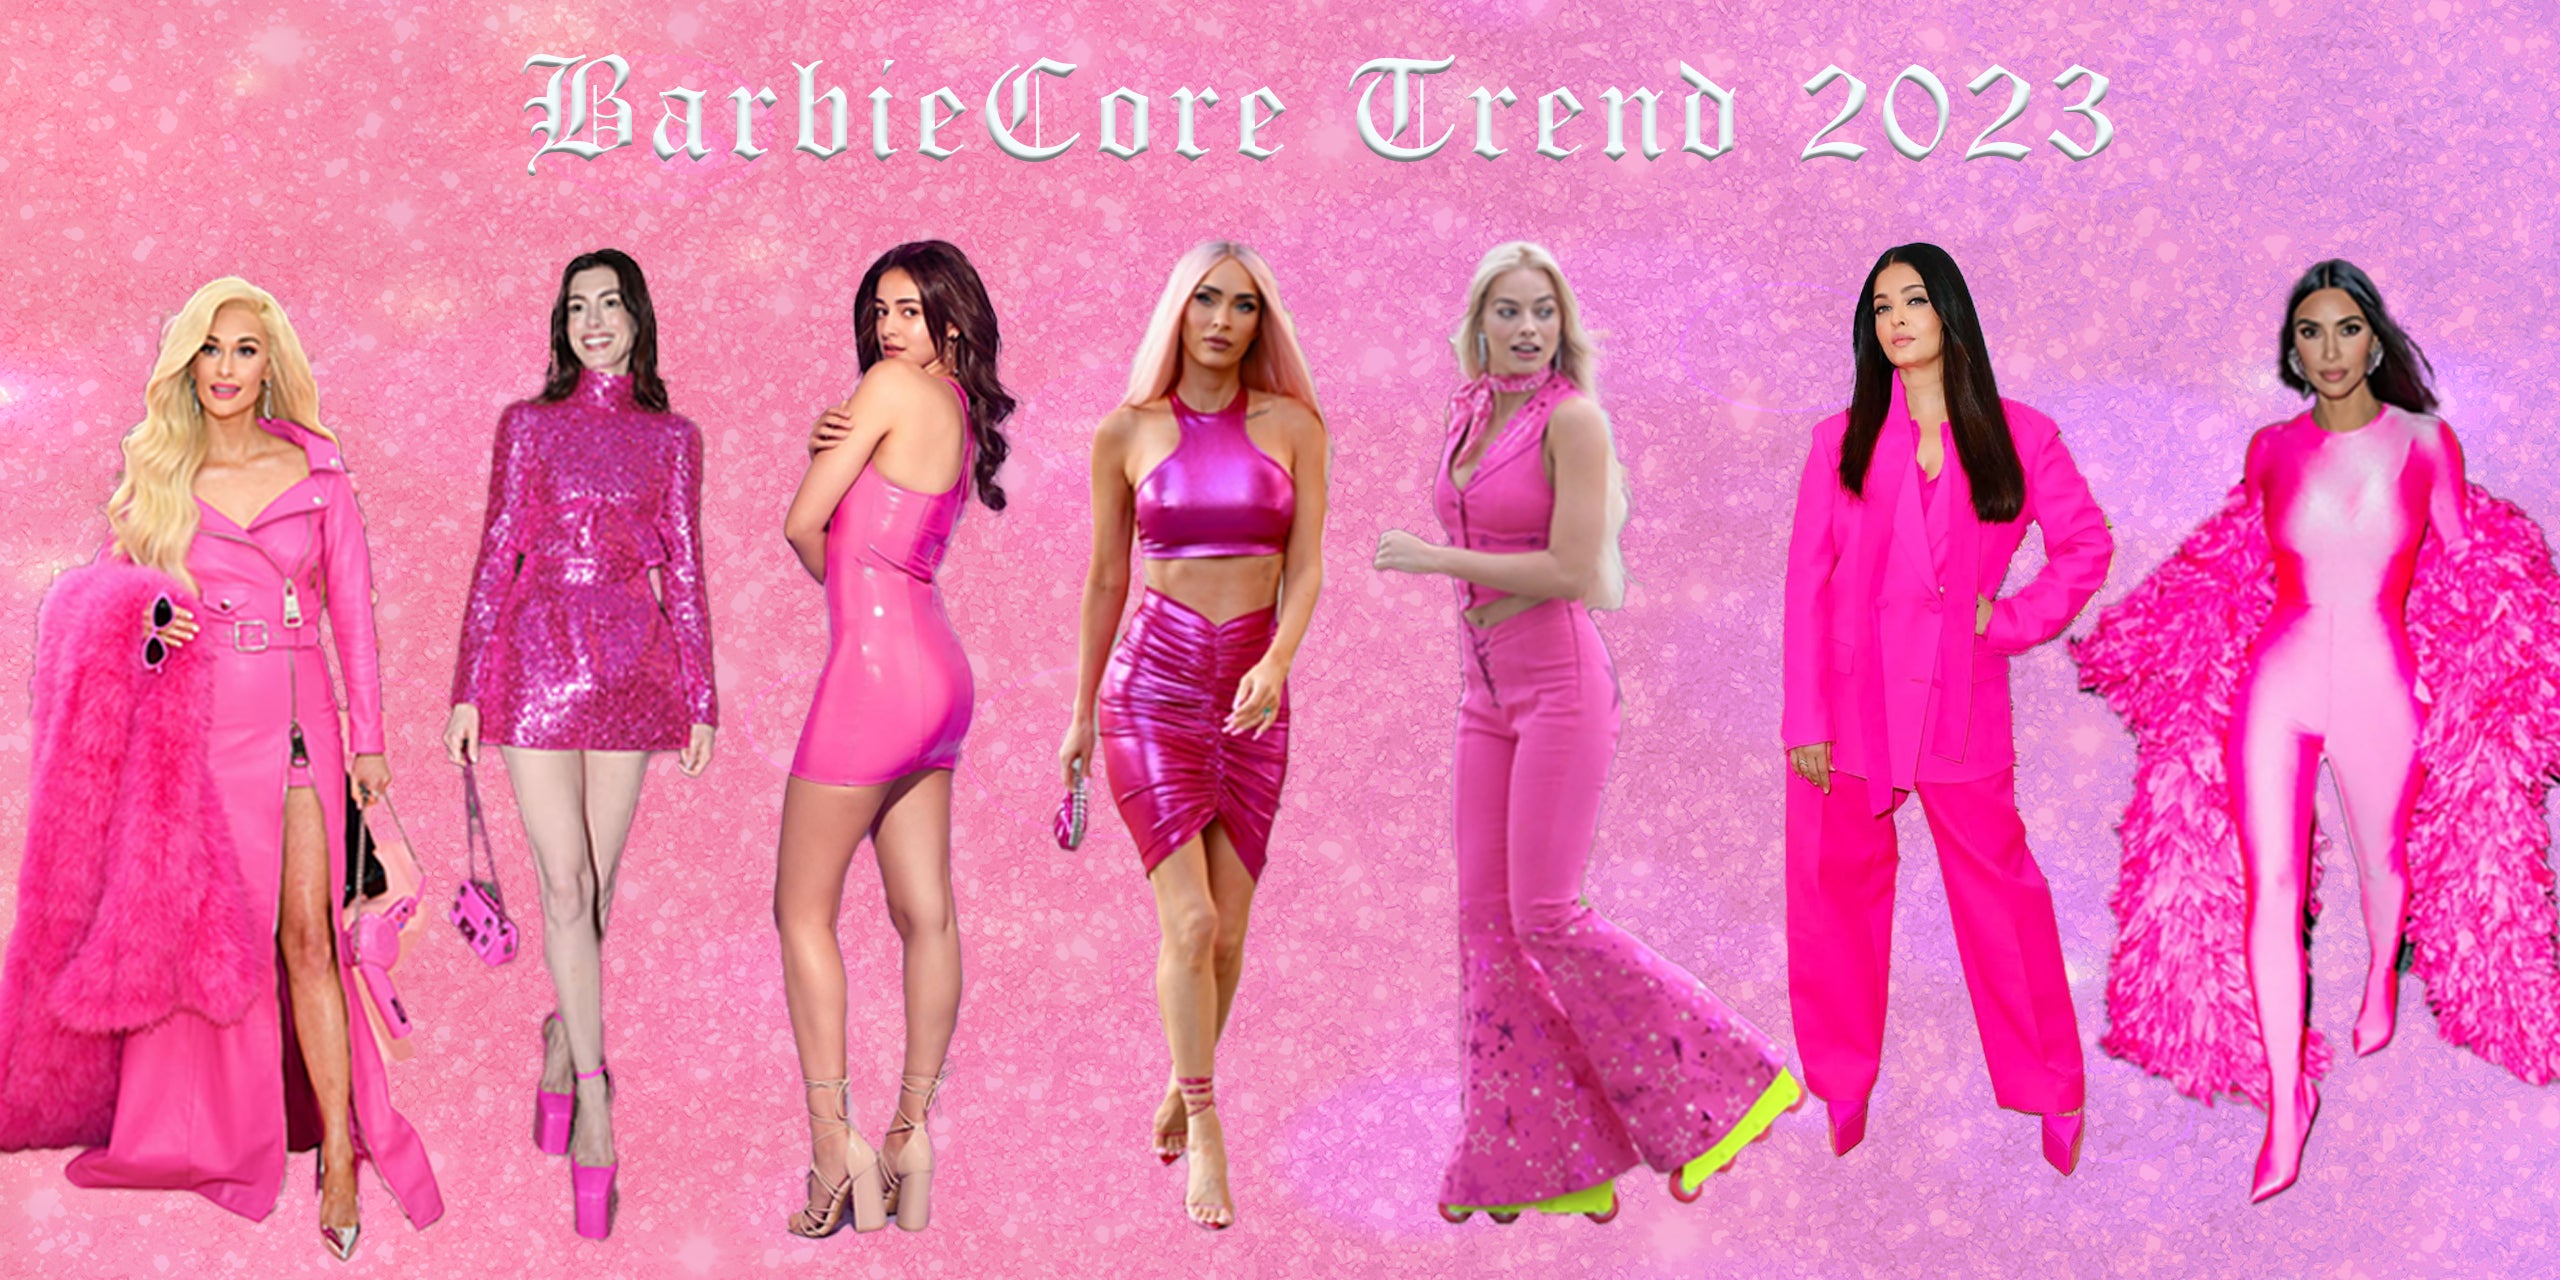 Barbiecore Fashion Trend: Get The Barbie Look With This Bright, Hot Pink  Shopping Edit